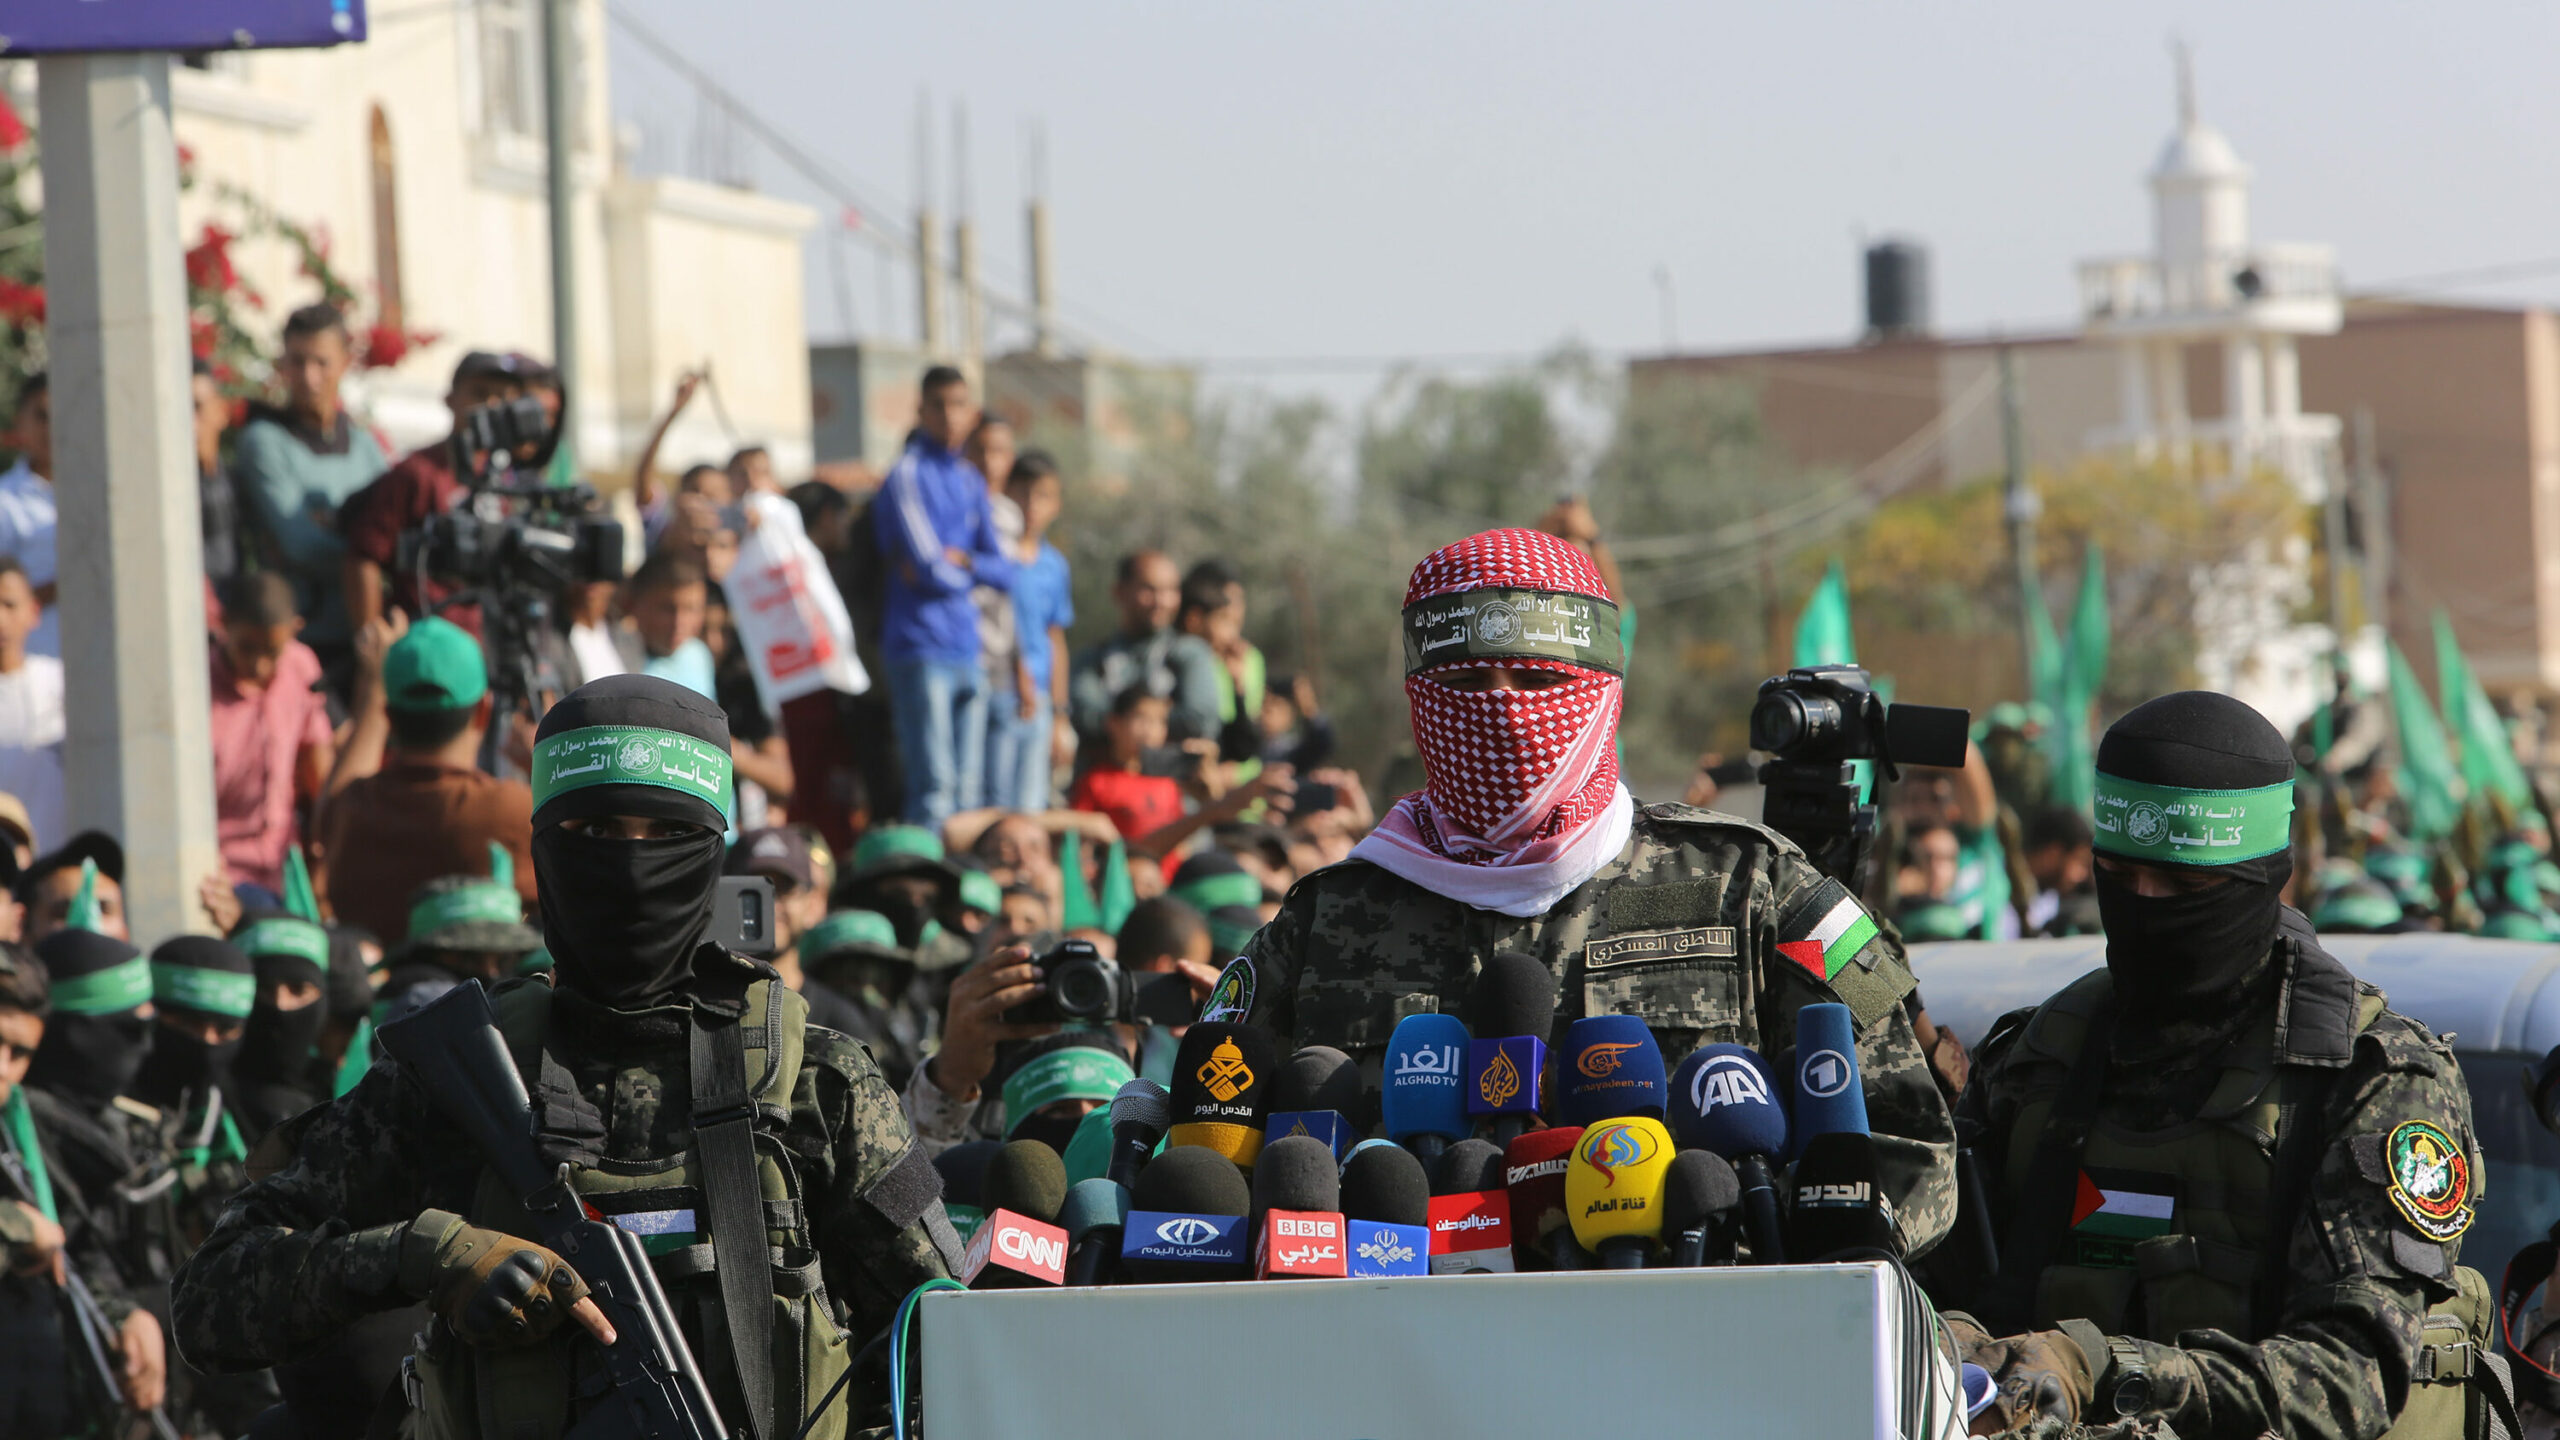 Hamas's strategy to fan the flames of violence in the West Bank & leave Gaza out might backfire. Playing with fire – Hamas might get burned. Palestinian Insights by Avi Melamed